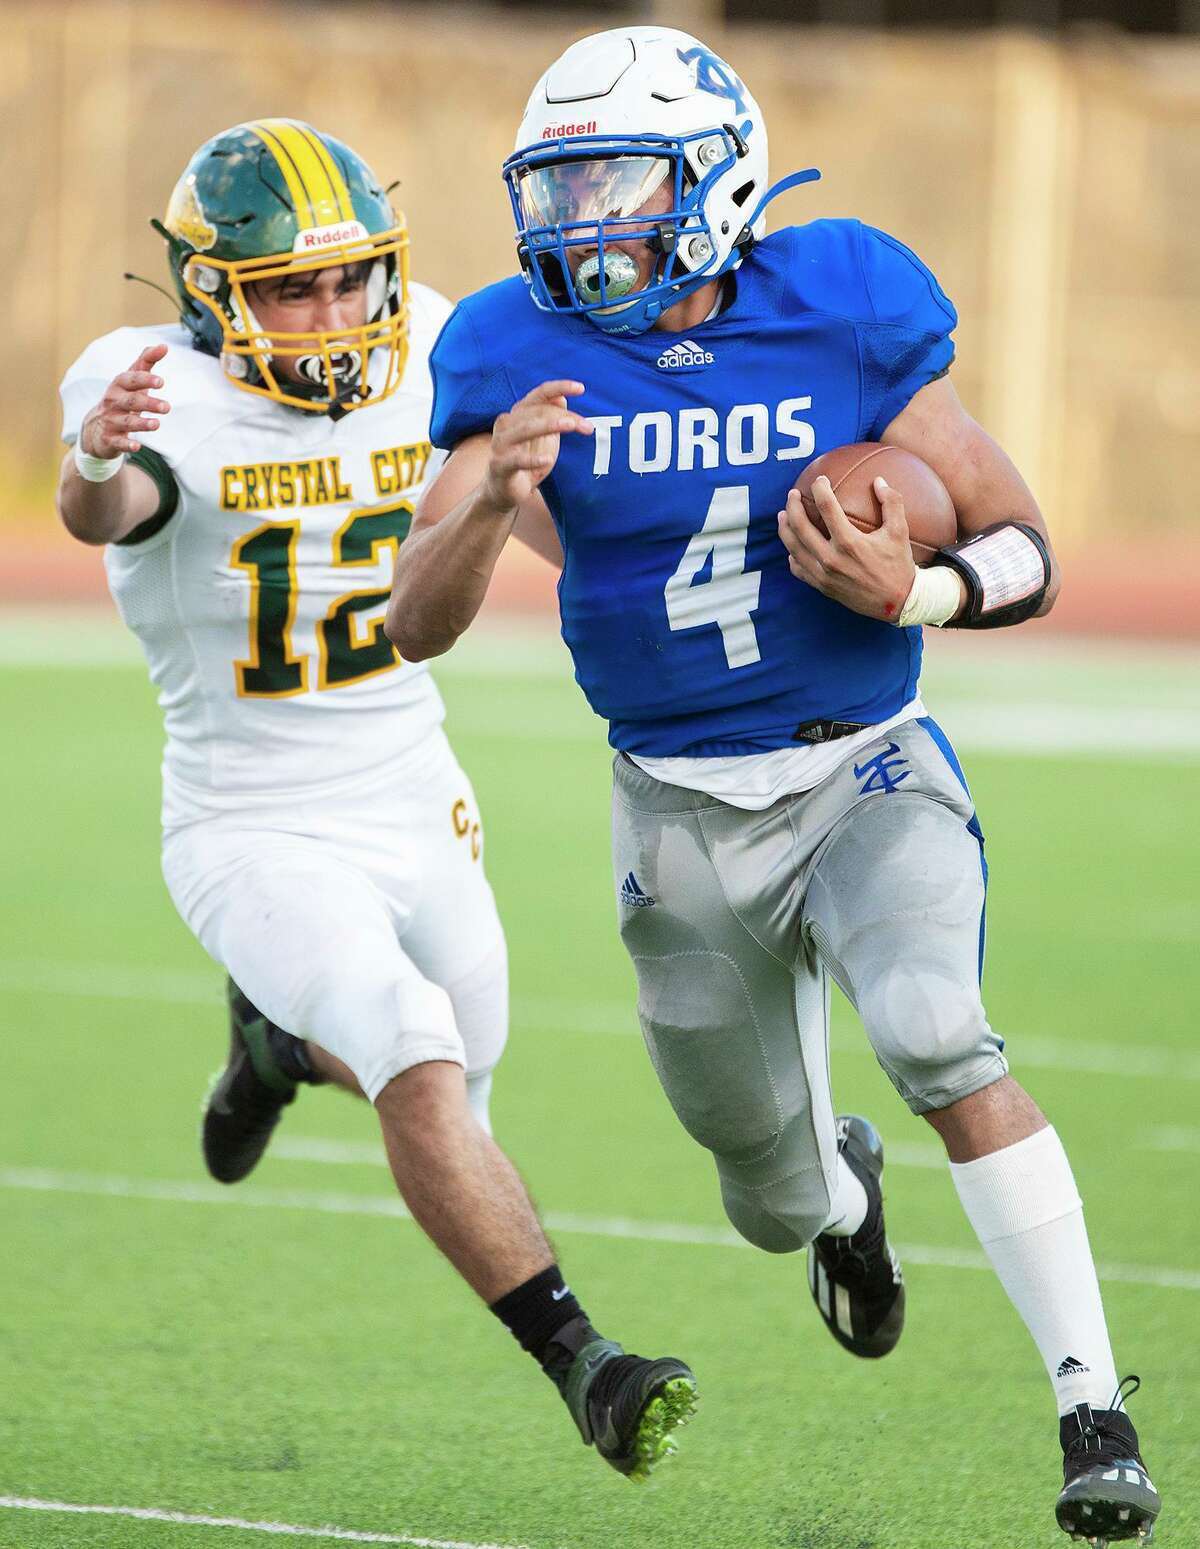 Speed has helped Cigarroa’s Ya-aqob Lozano run for 820 yards and 13 touchdowns during non-district play.